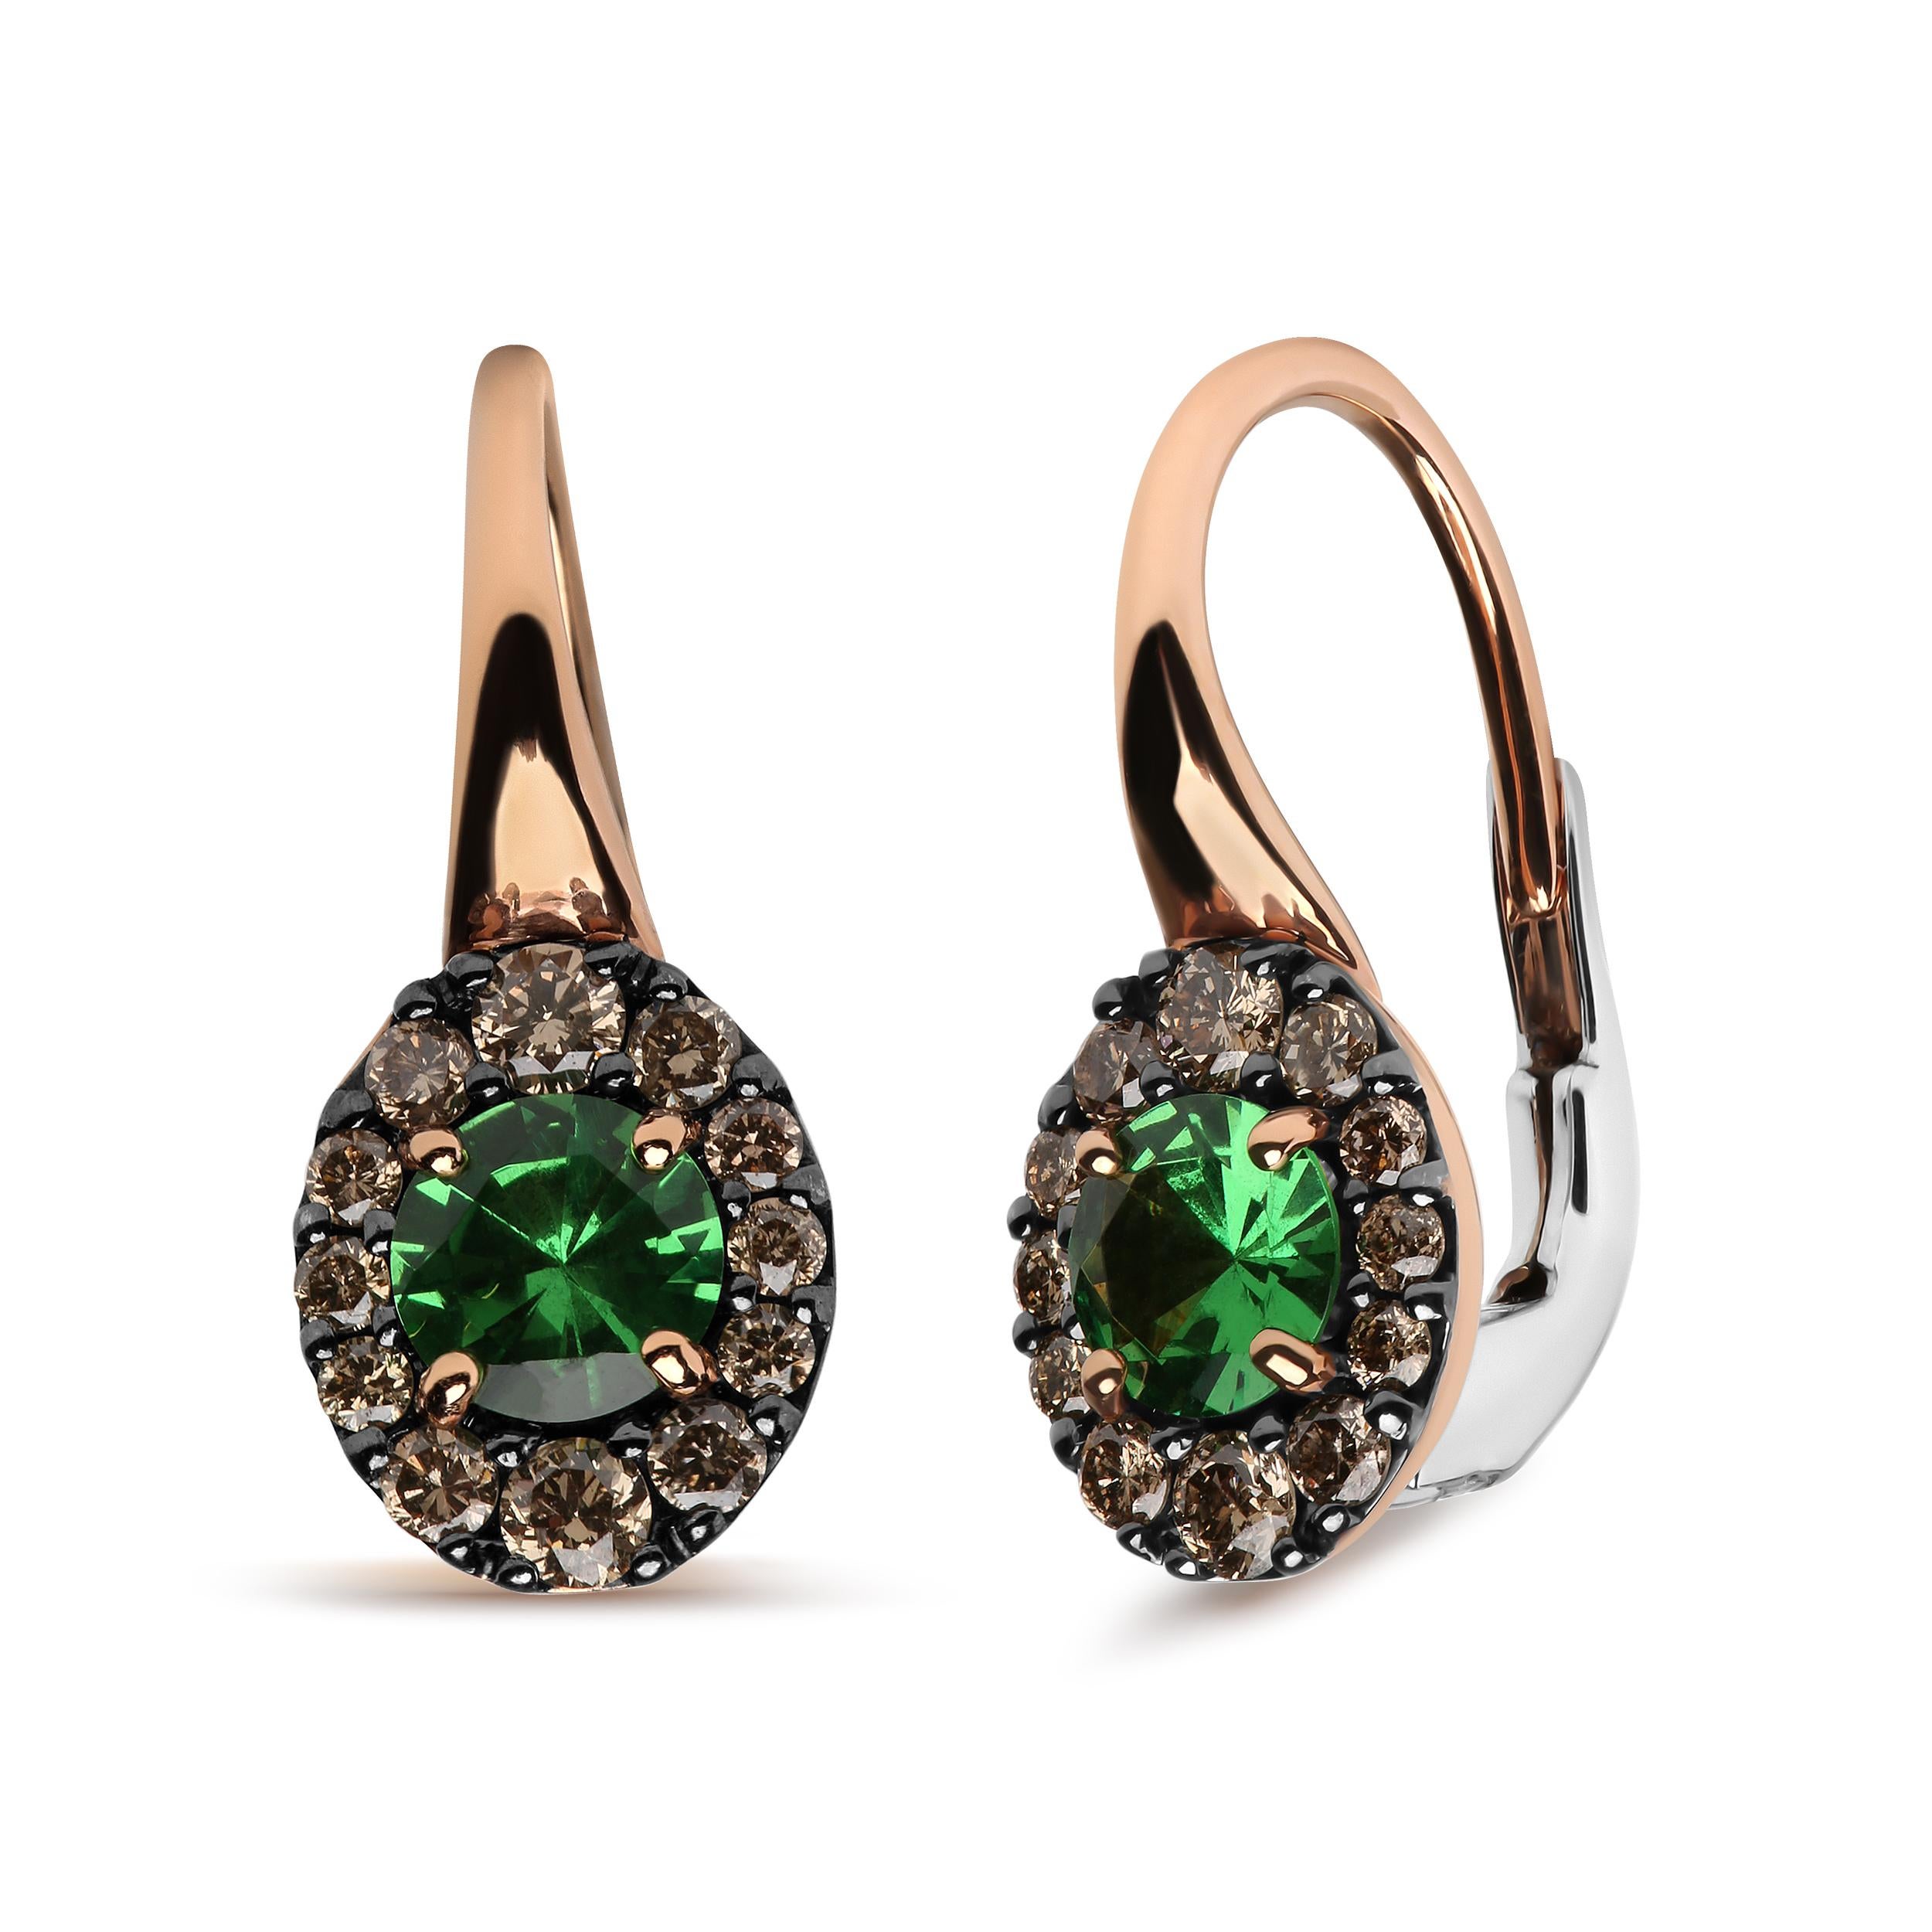 The striking beauty of natural gemstones is complemented by halos of diamonds in these sensational 18k rose and white gold drop hoop earrings. Nested within 4-prong settings in each earring are 4.5mm round heat-treated green tsavorite gemstones.